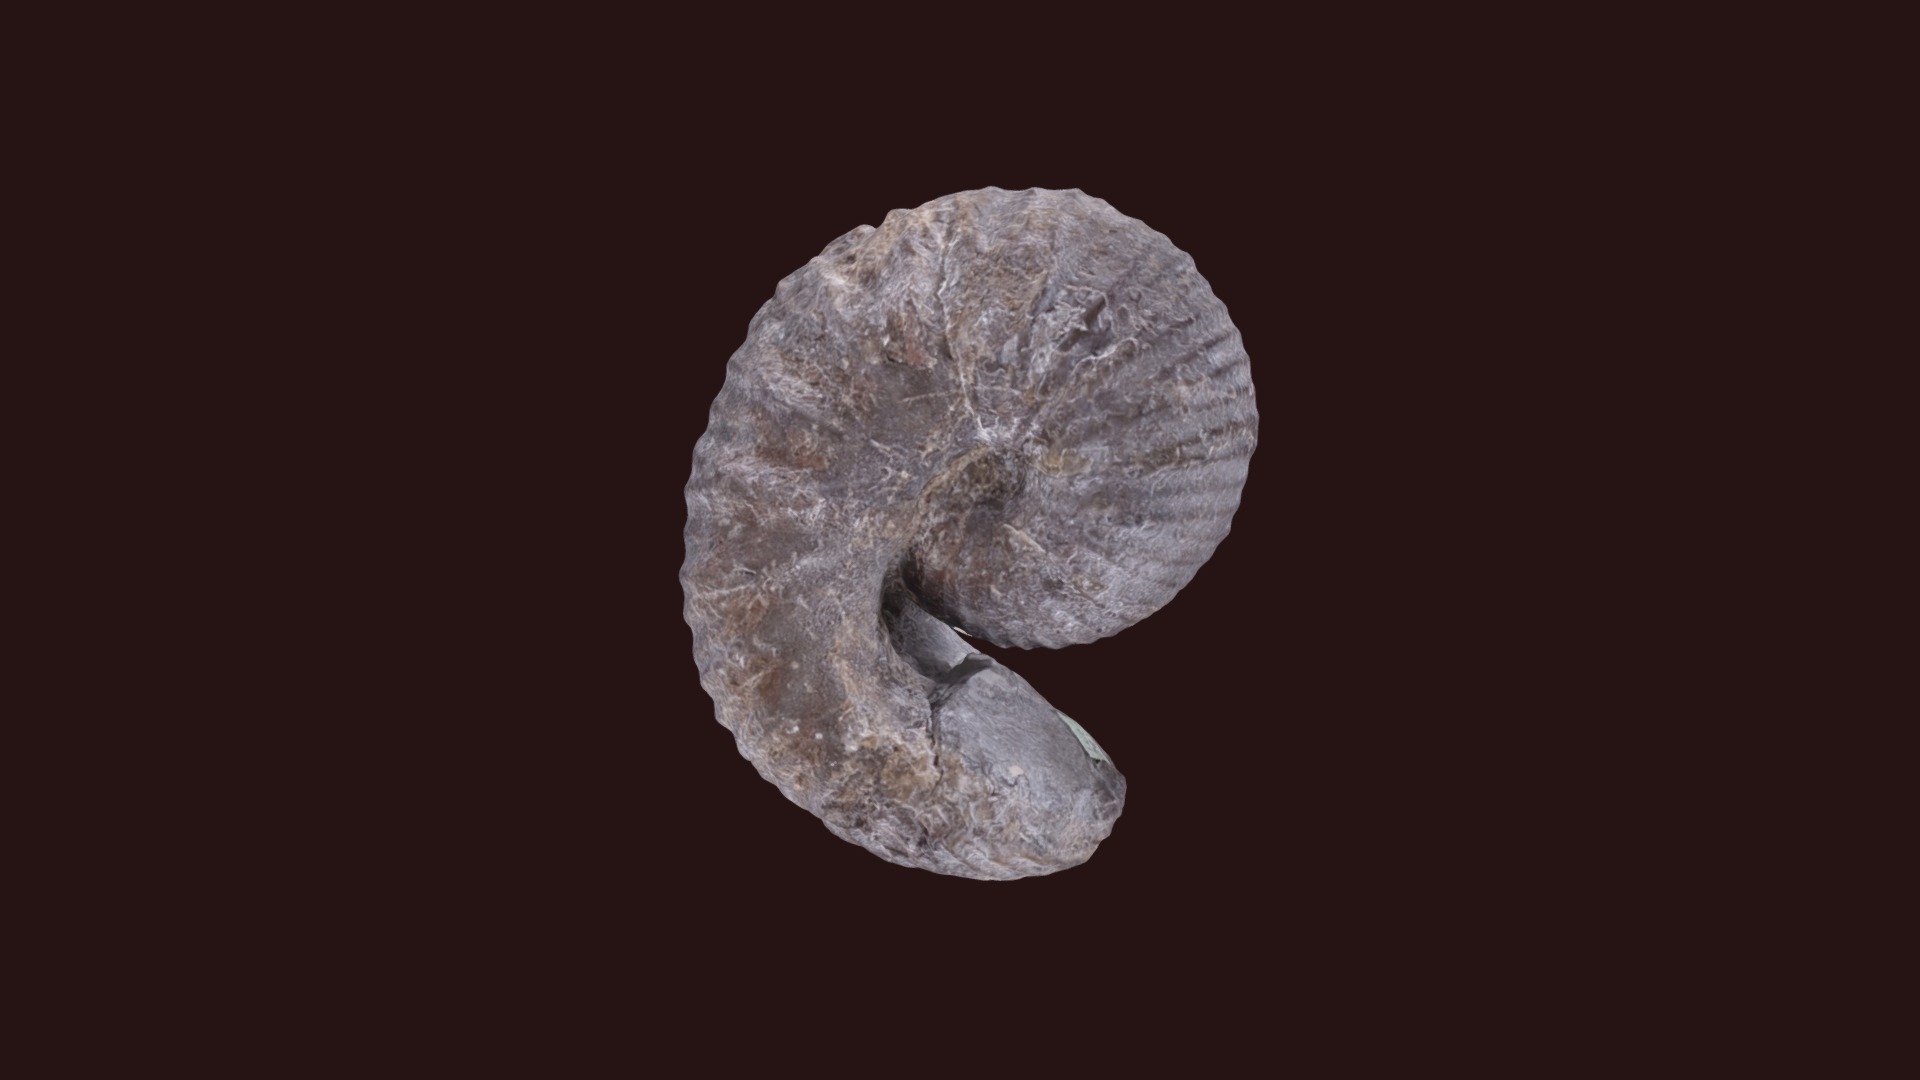 3D model Scaphites ventricosus D1684 - This is a 3D model of the Scaphites ventricosus D1684. The 3D model is about a rock with a dark background.